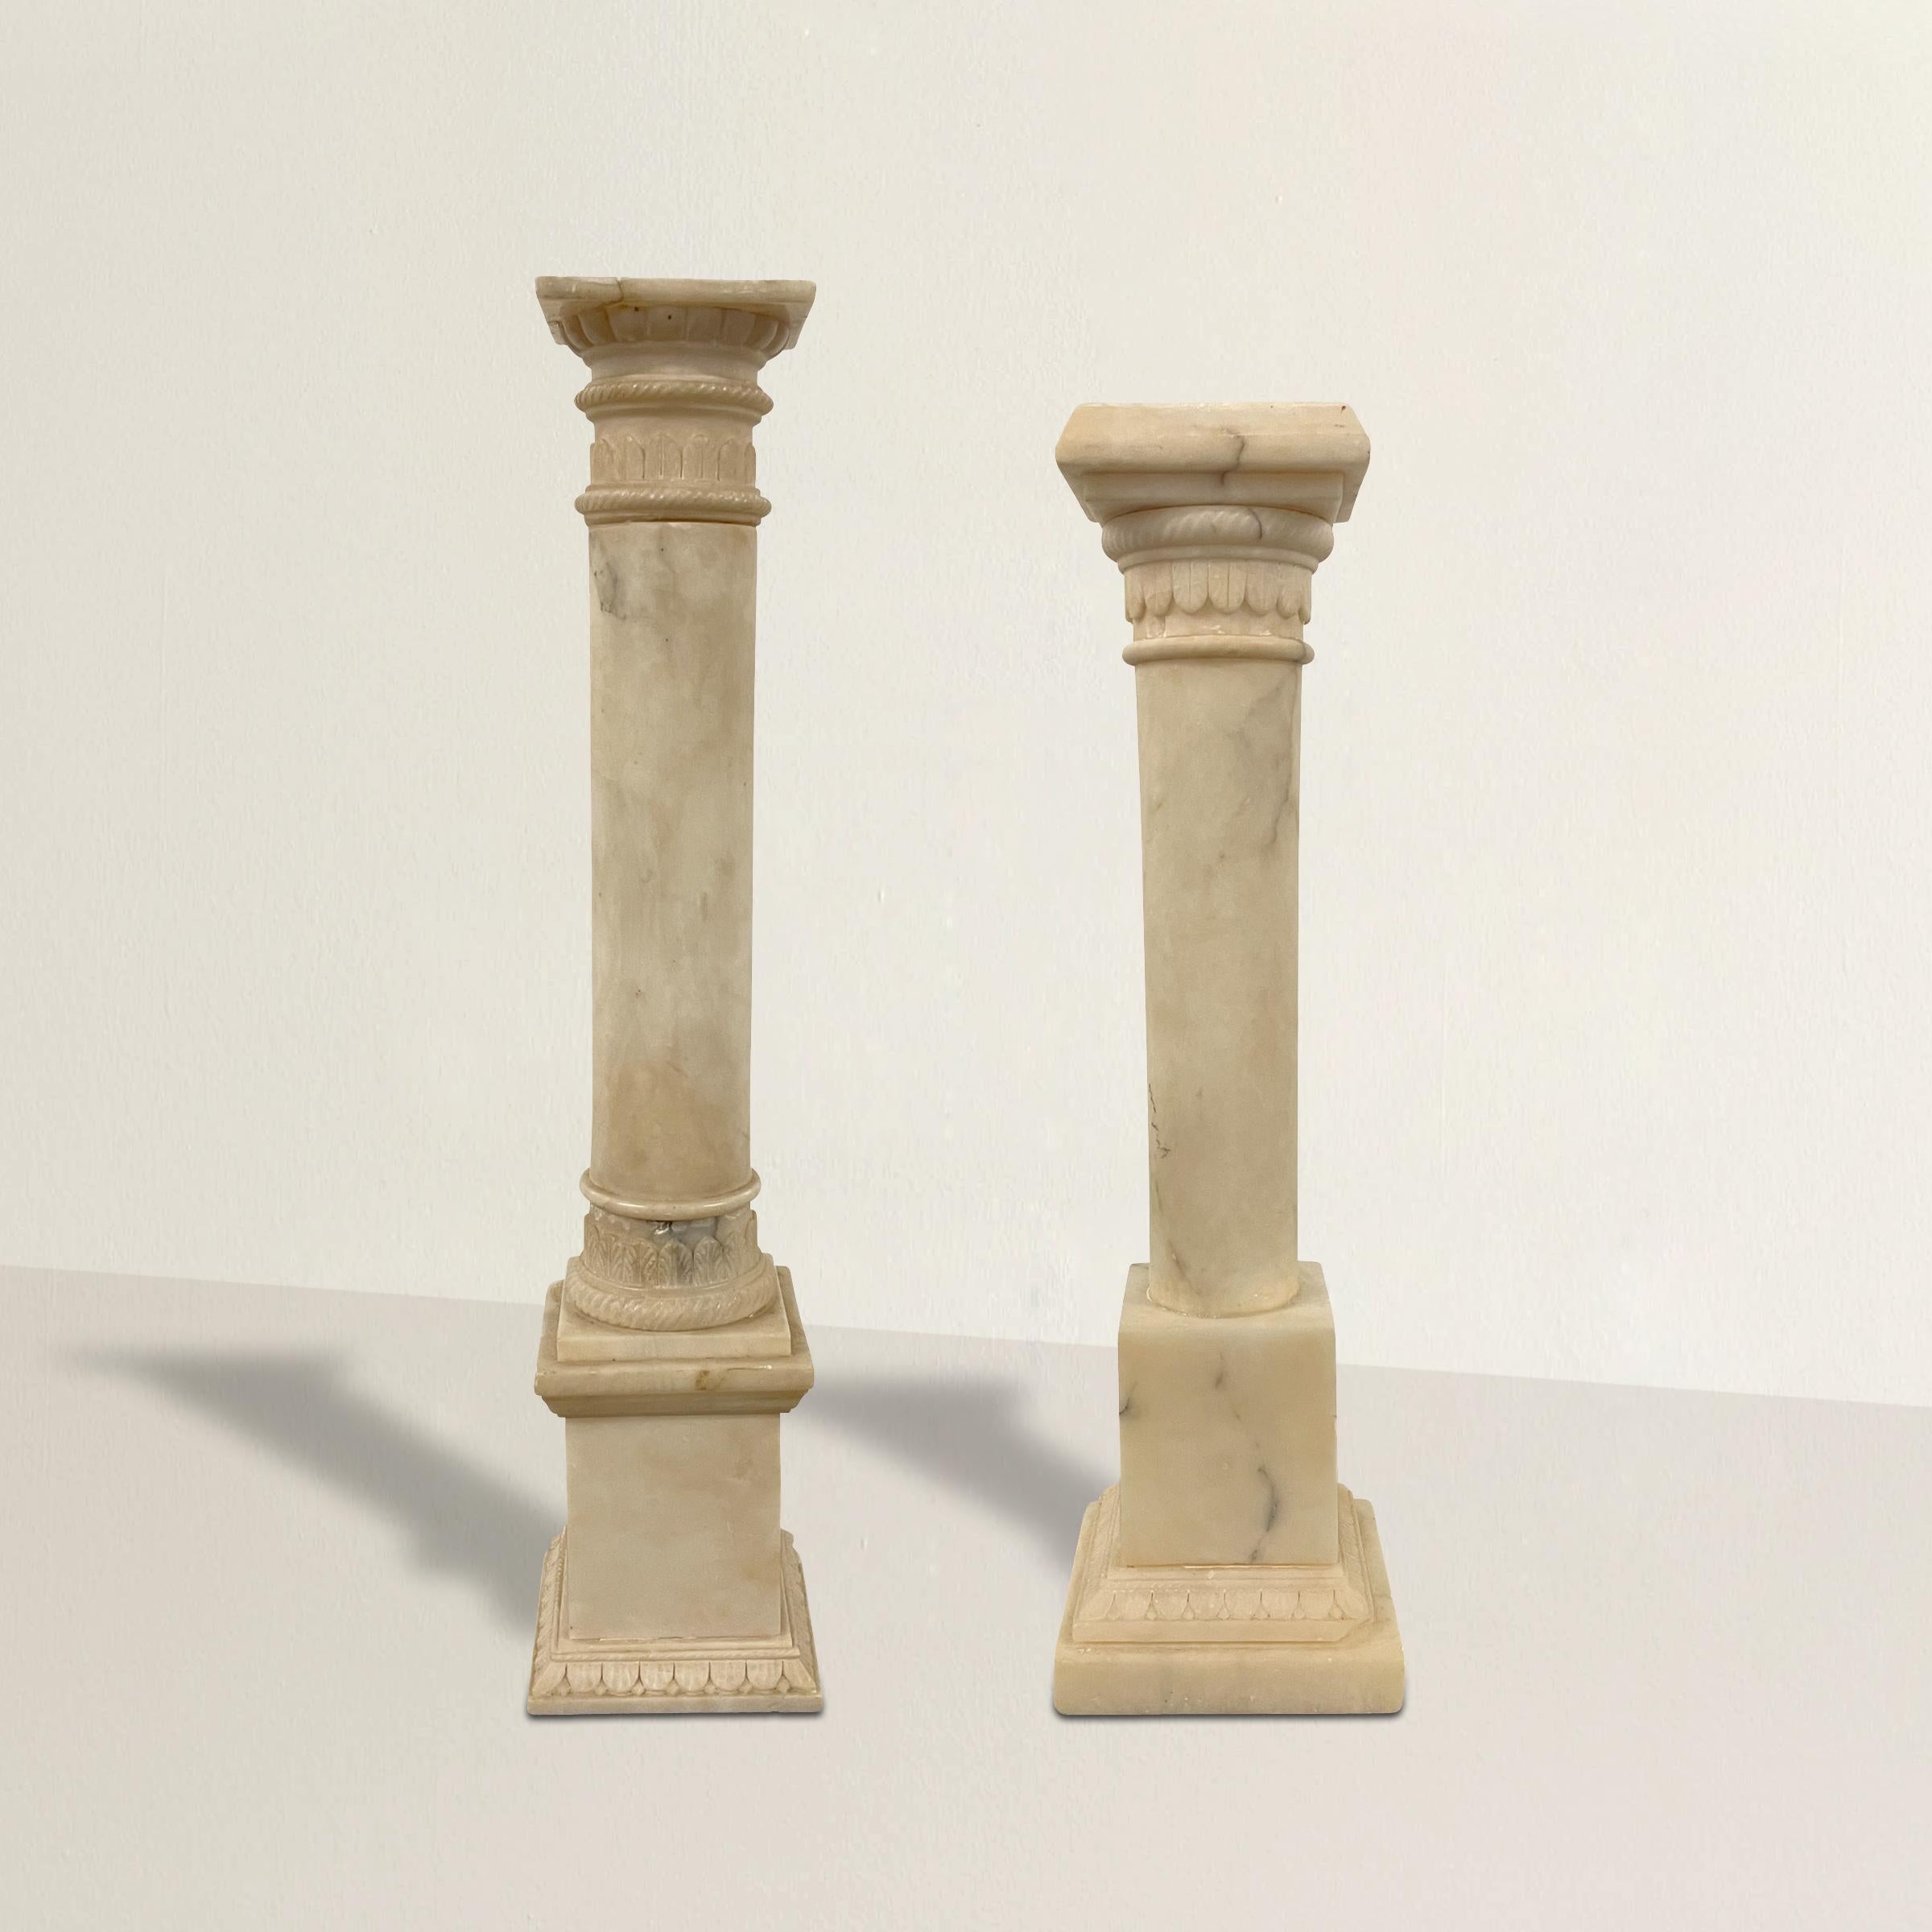 Pair of early 20th century Italian neoclassical-style alabaster columns, reminiscent of Grand Tour souvenirs, with carved acanthus leaf details, and each resting on square bases with more carved leaf details.

Measures: Shorter: 3.63 in. W x 3.63